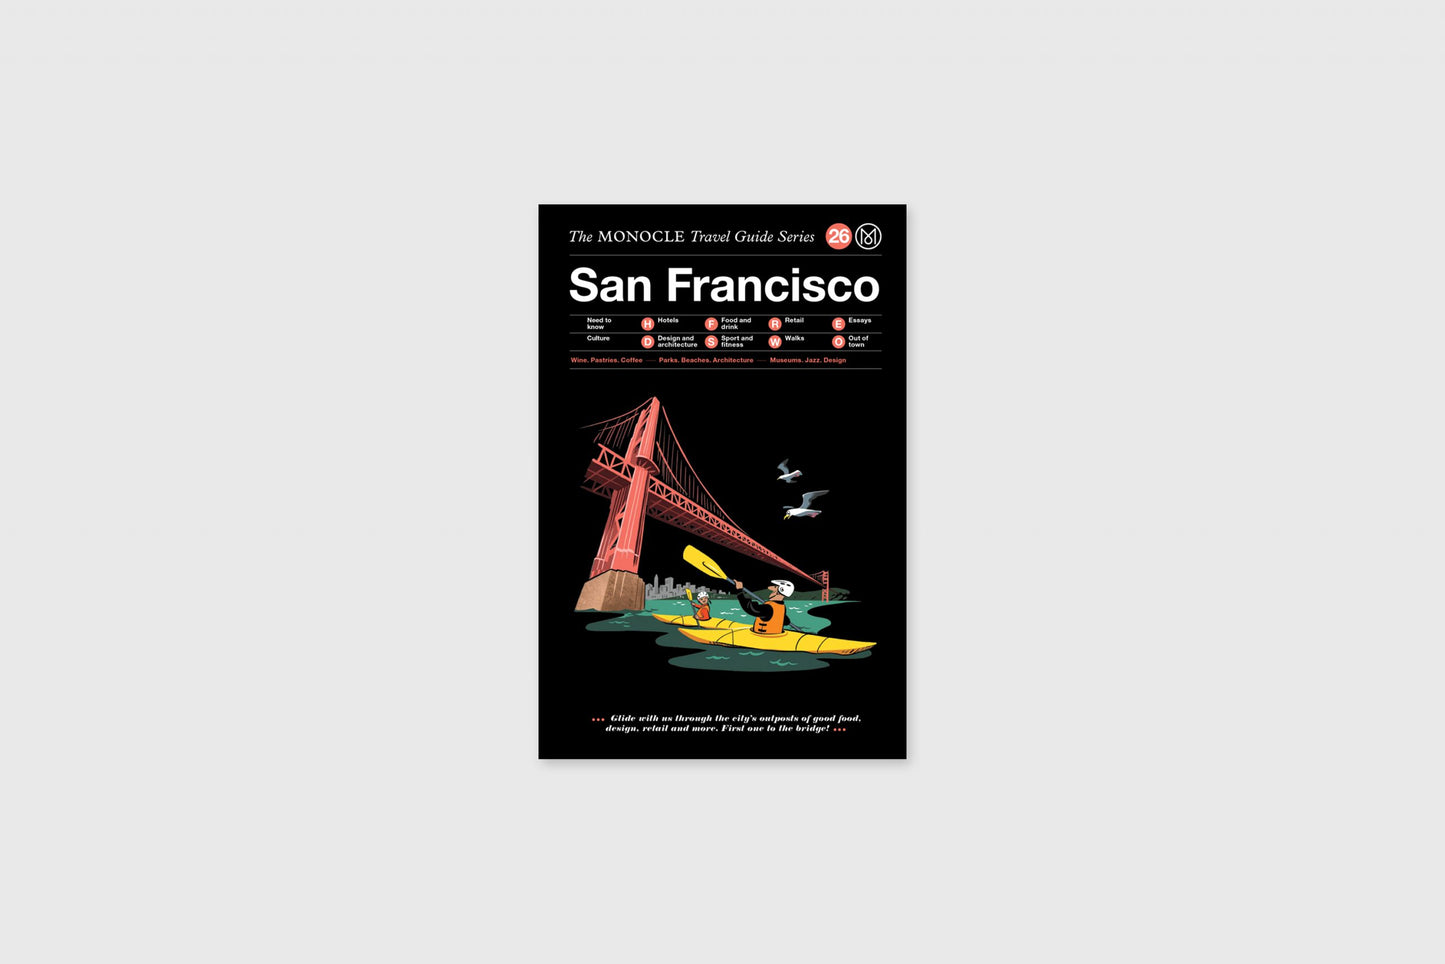 San Francisco: The Monocle Travel Guide Series